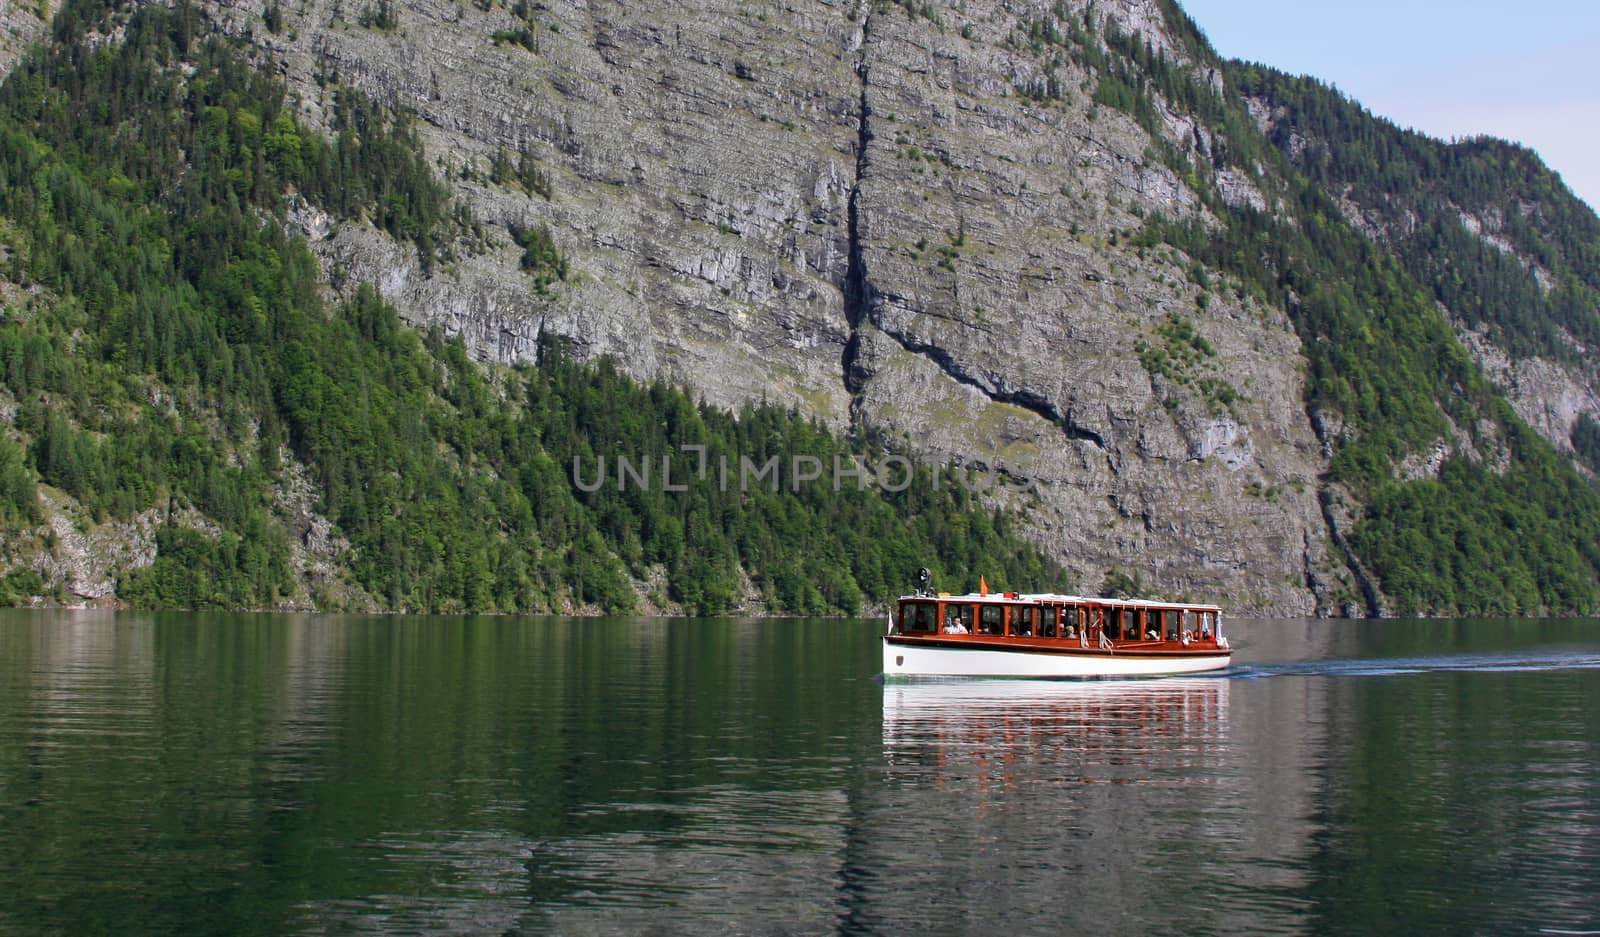 he Königssee is a lake located in the extreme southeast Berchtesgadener Land district of the German state of Bavaria, near the border with Austria. Large parts are comprised by the Berchtesgaden National Park.